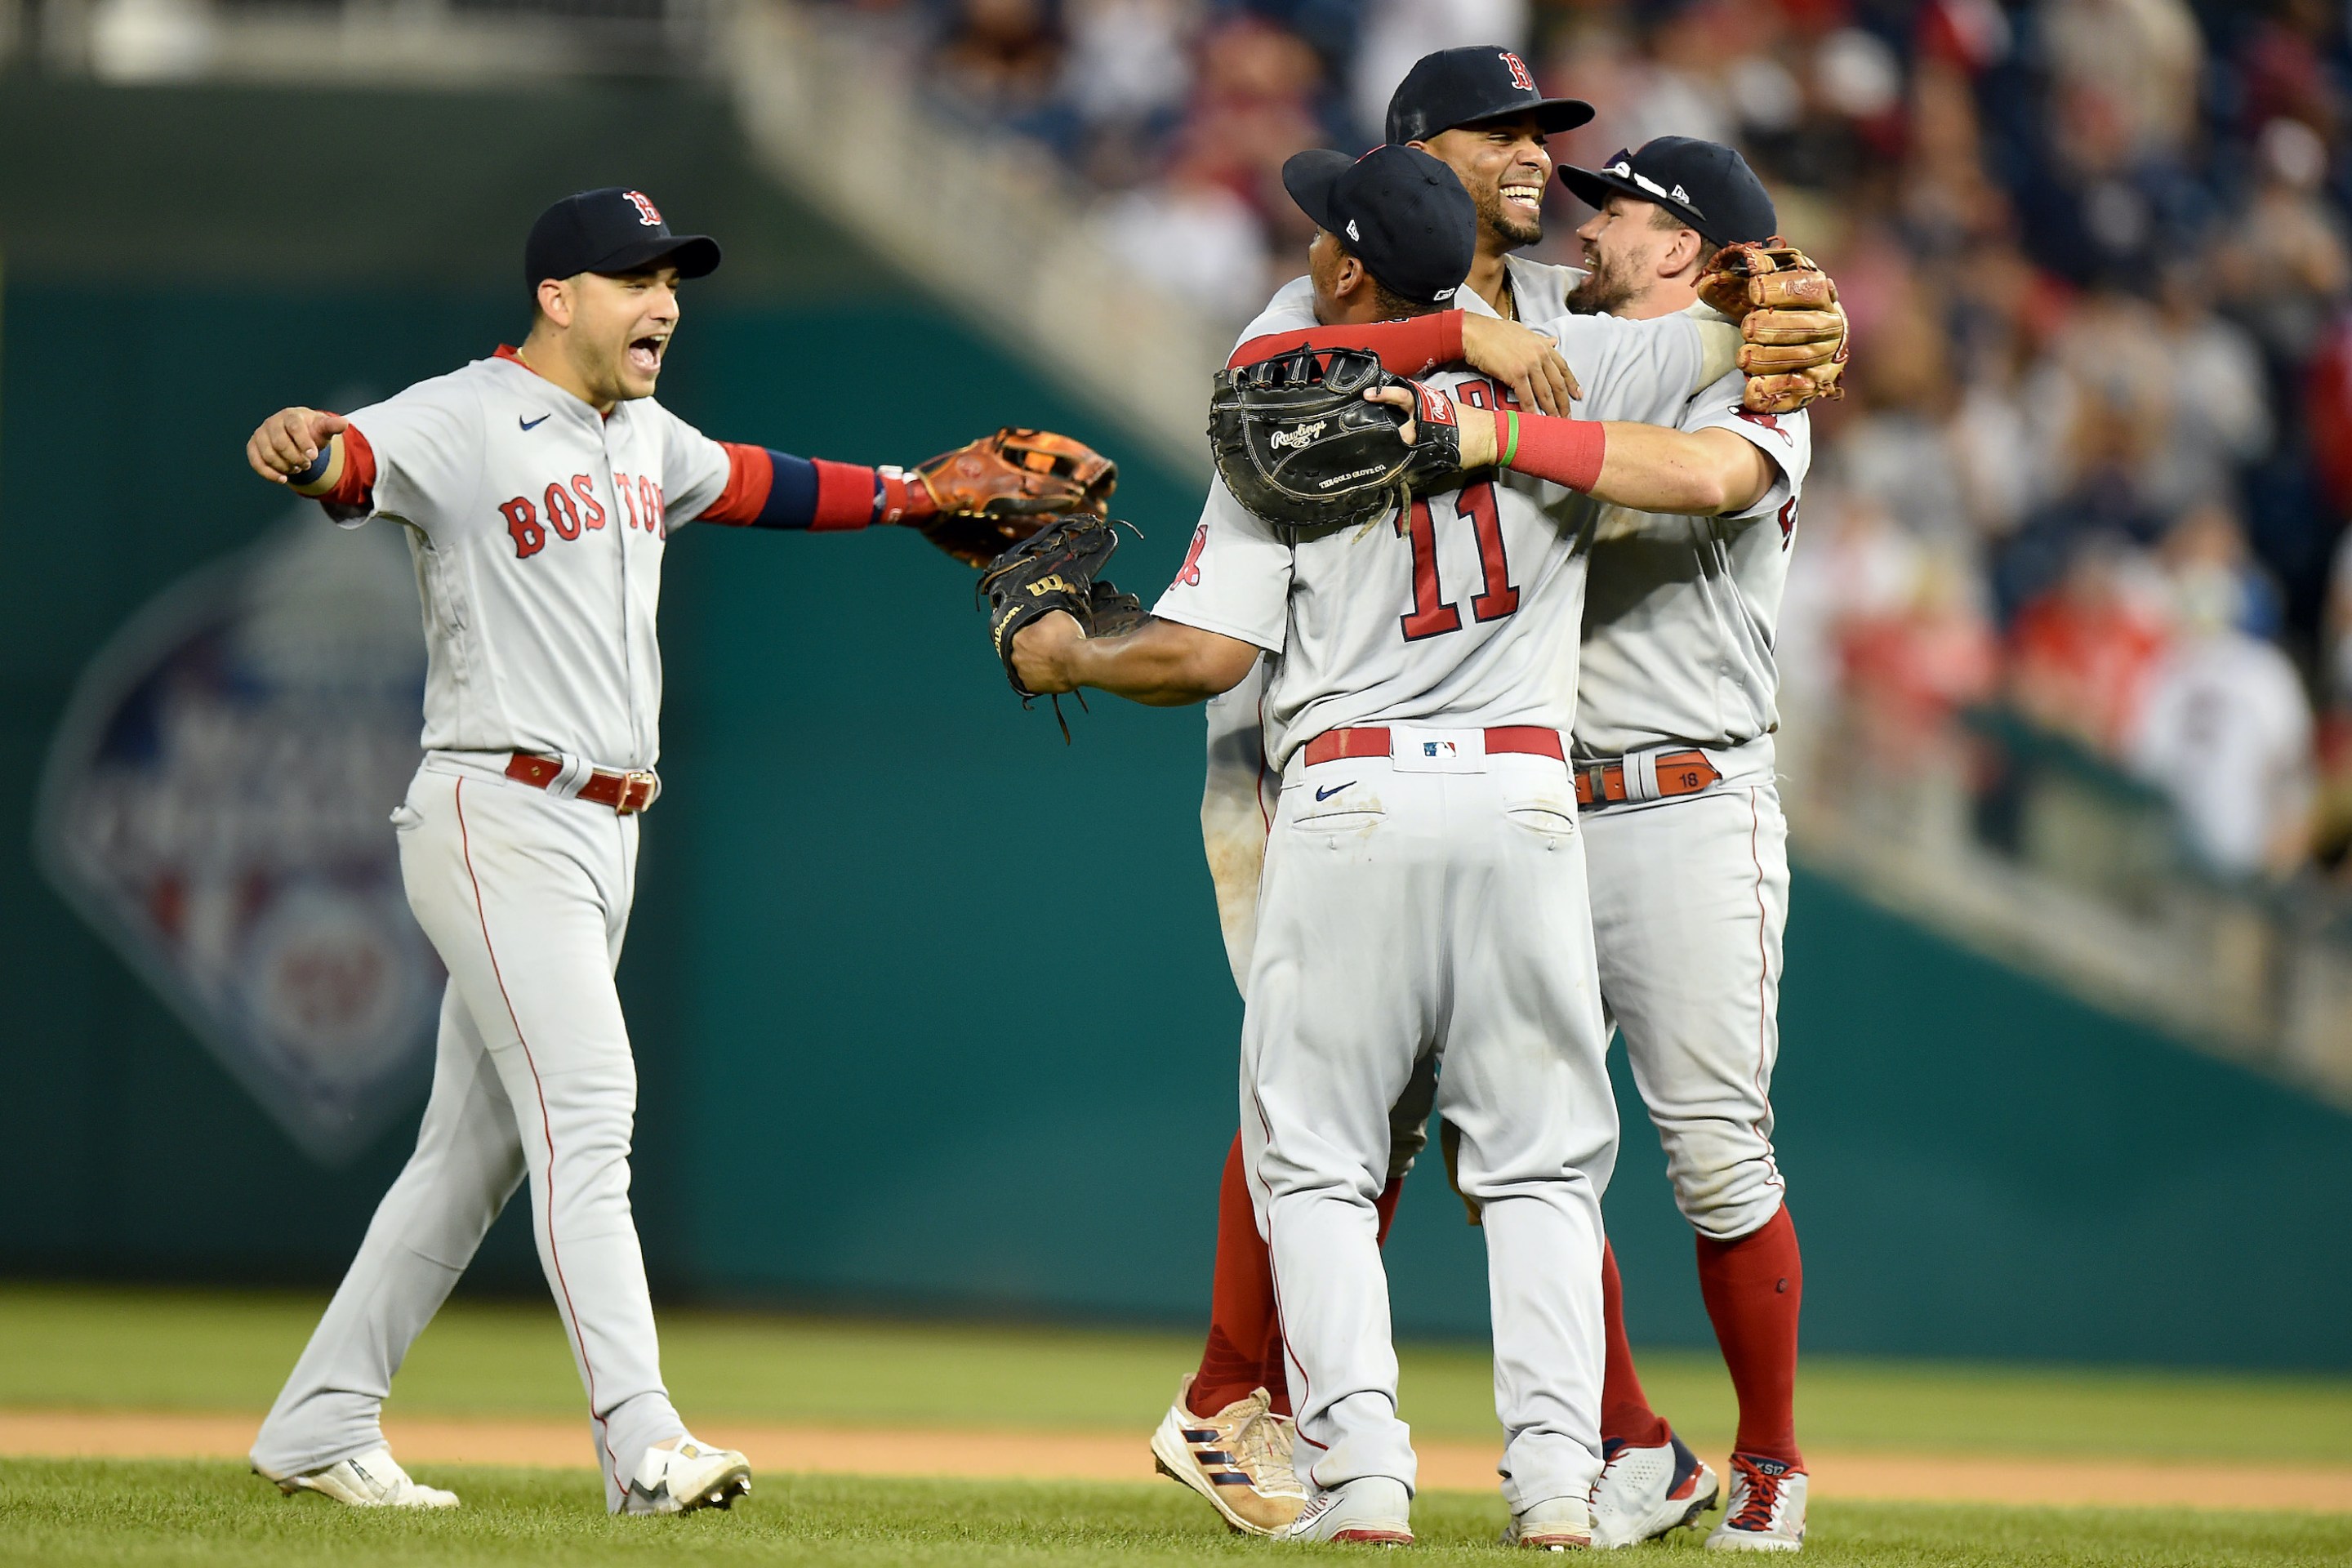 Jose Iglesias #12, Xander Bogaerts #2, Rafael Devers #11 and Kyle Schwarber #18 of the Boston Red Sox celebrate after a 7-5 victory against the Washington Nationals at Nationals Park on October 03, 2021 in Washington, DC.